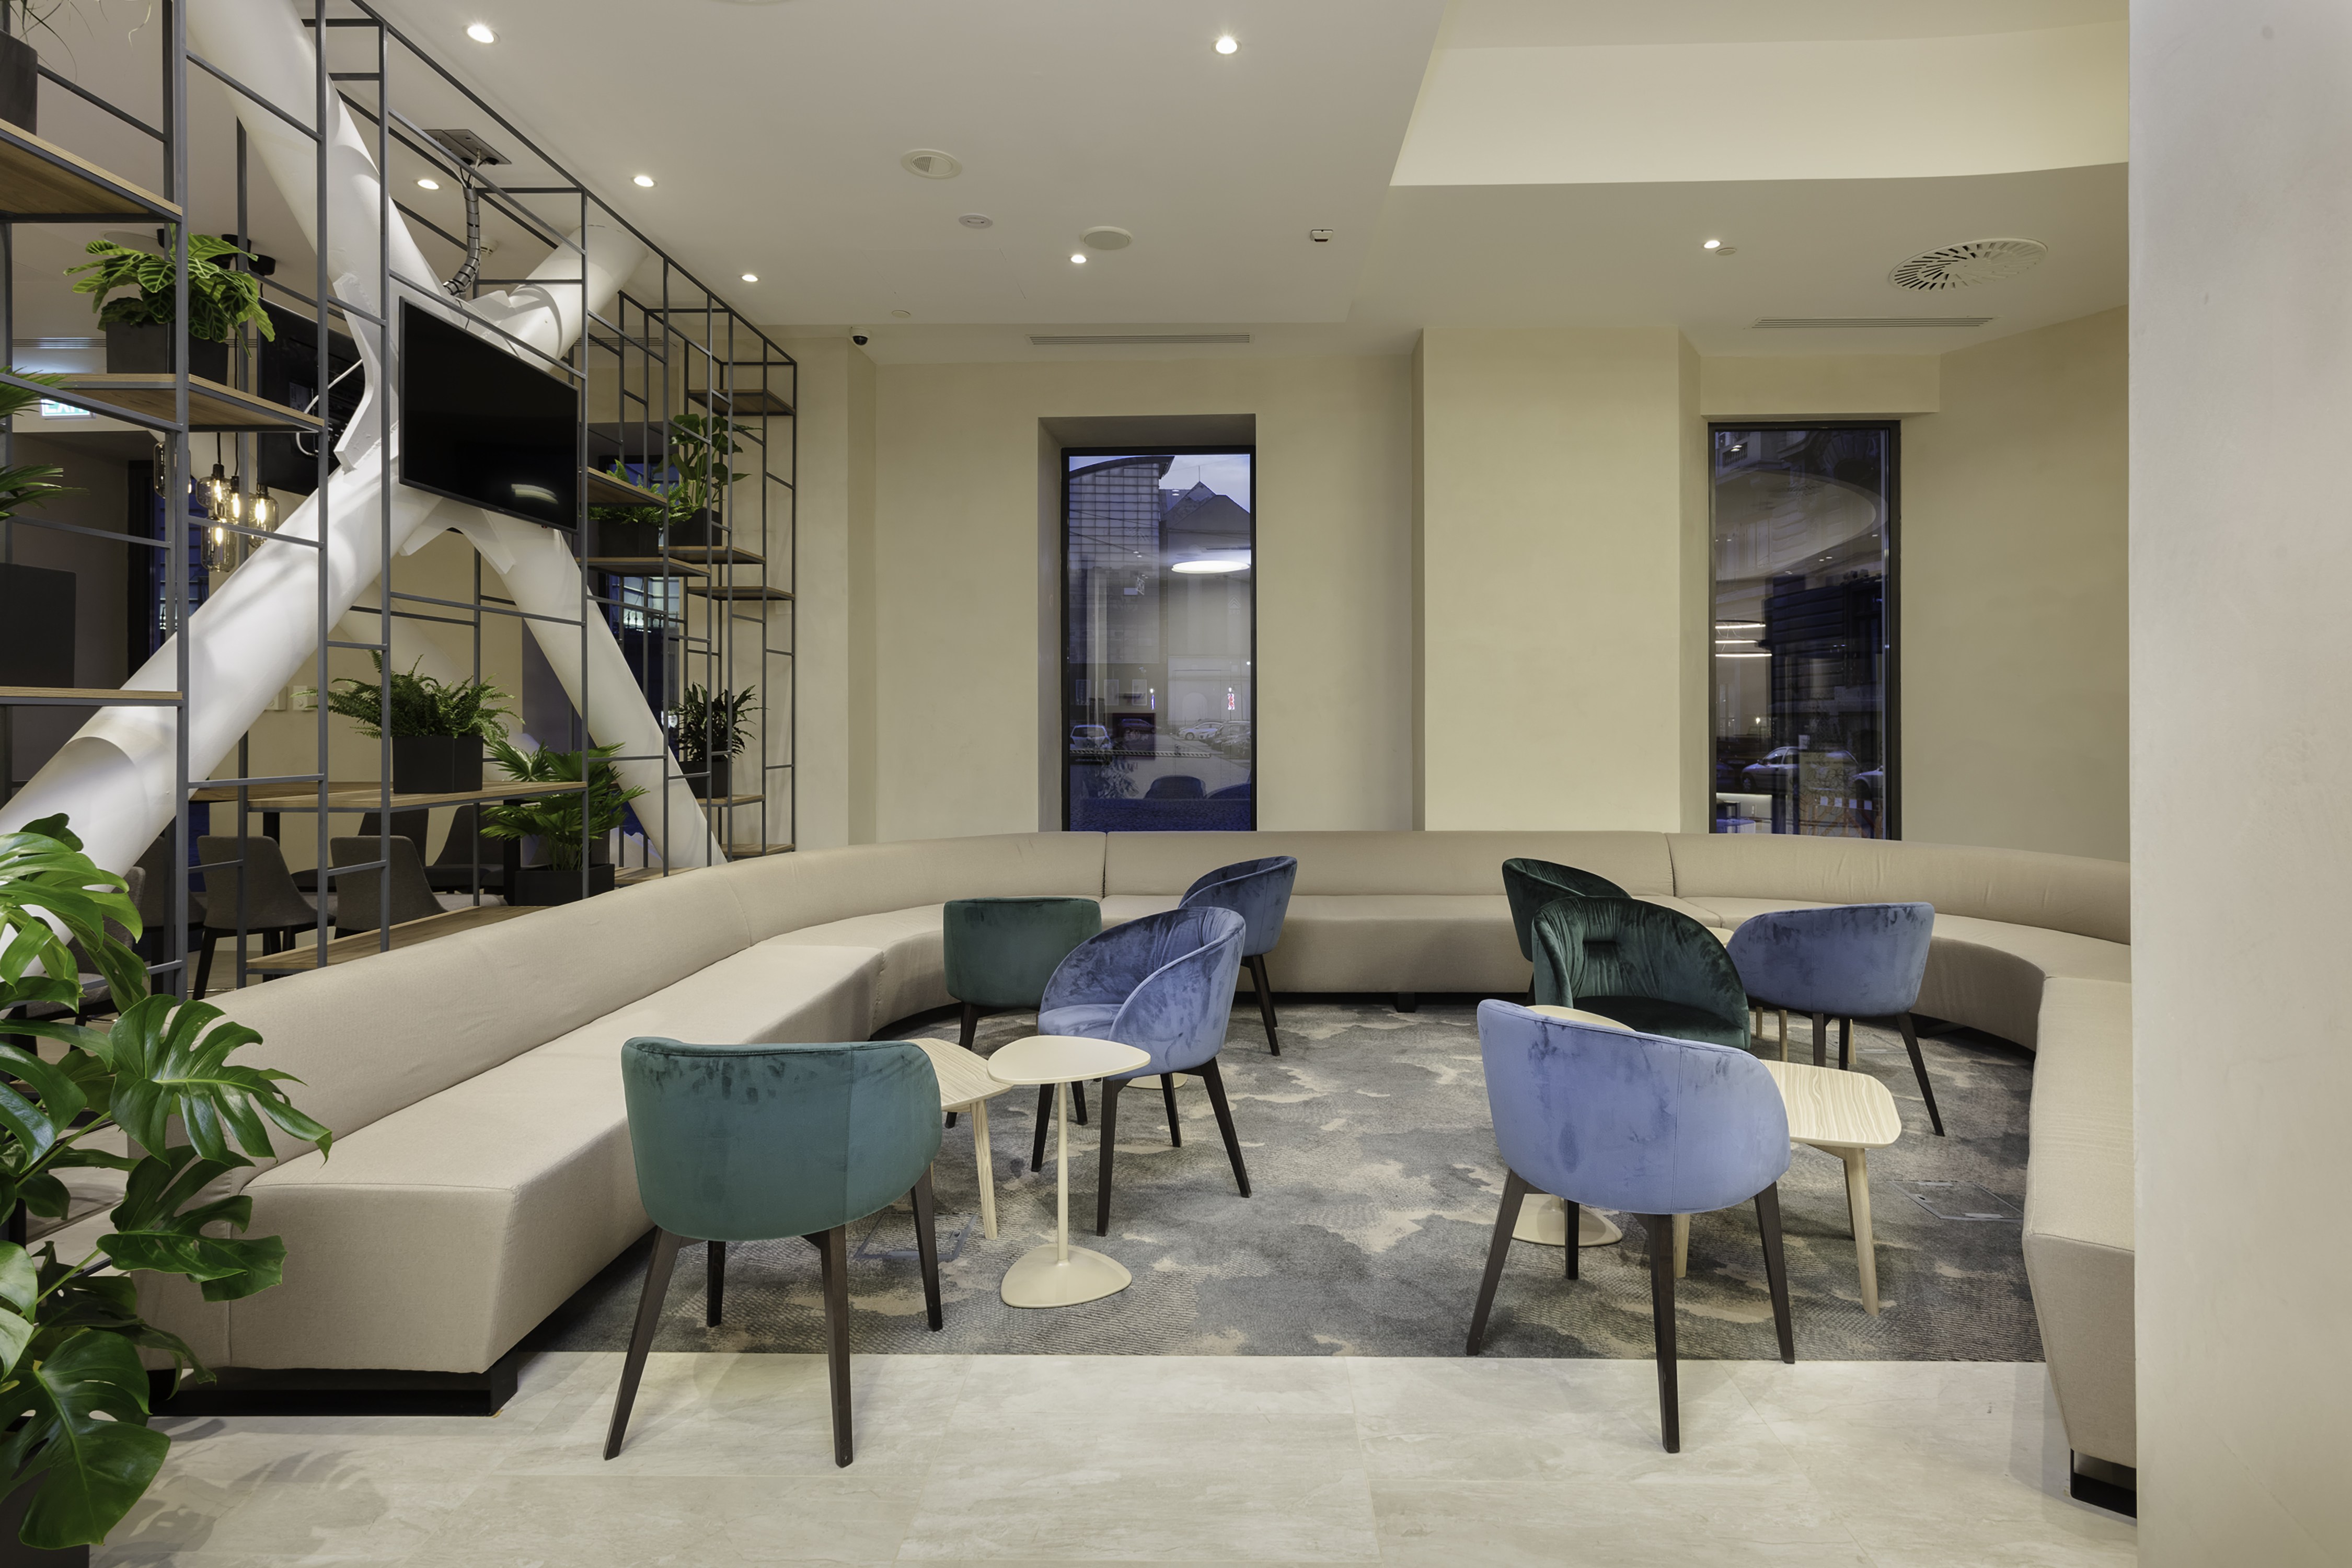 Lobby Seating Area with Armchairs, Tables and Sofa